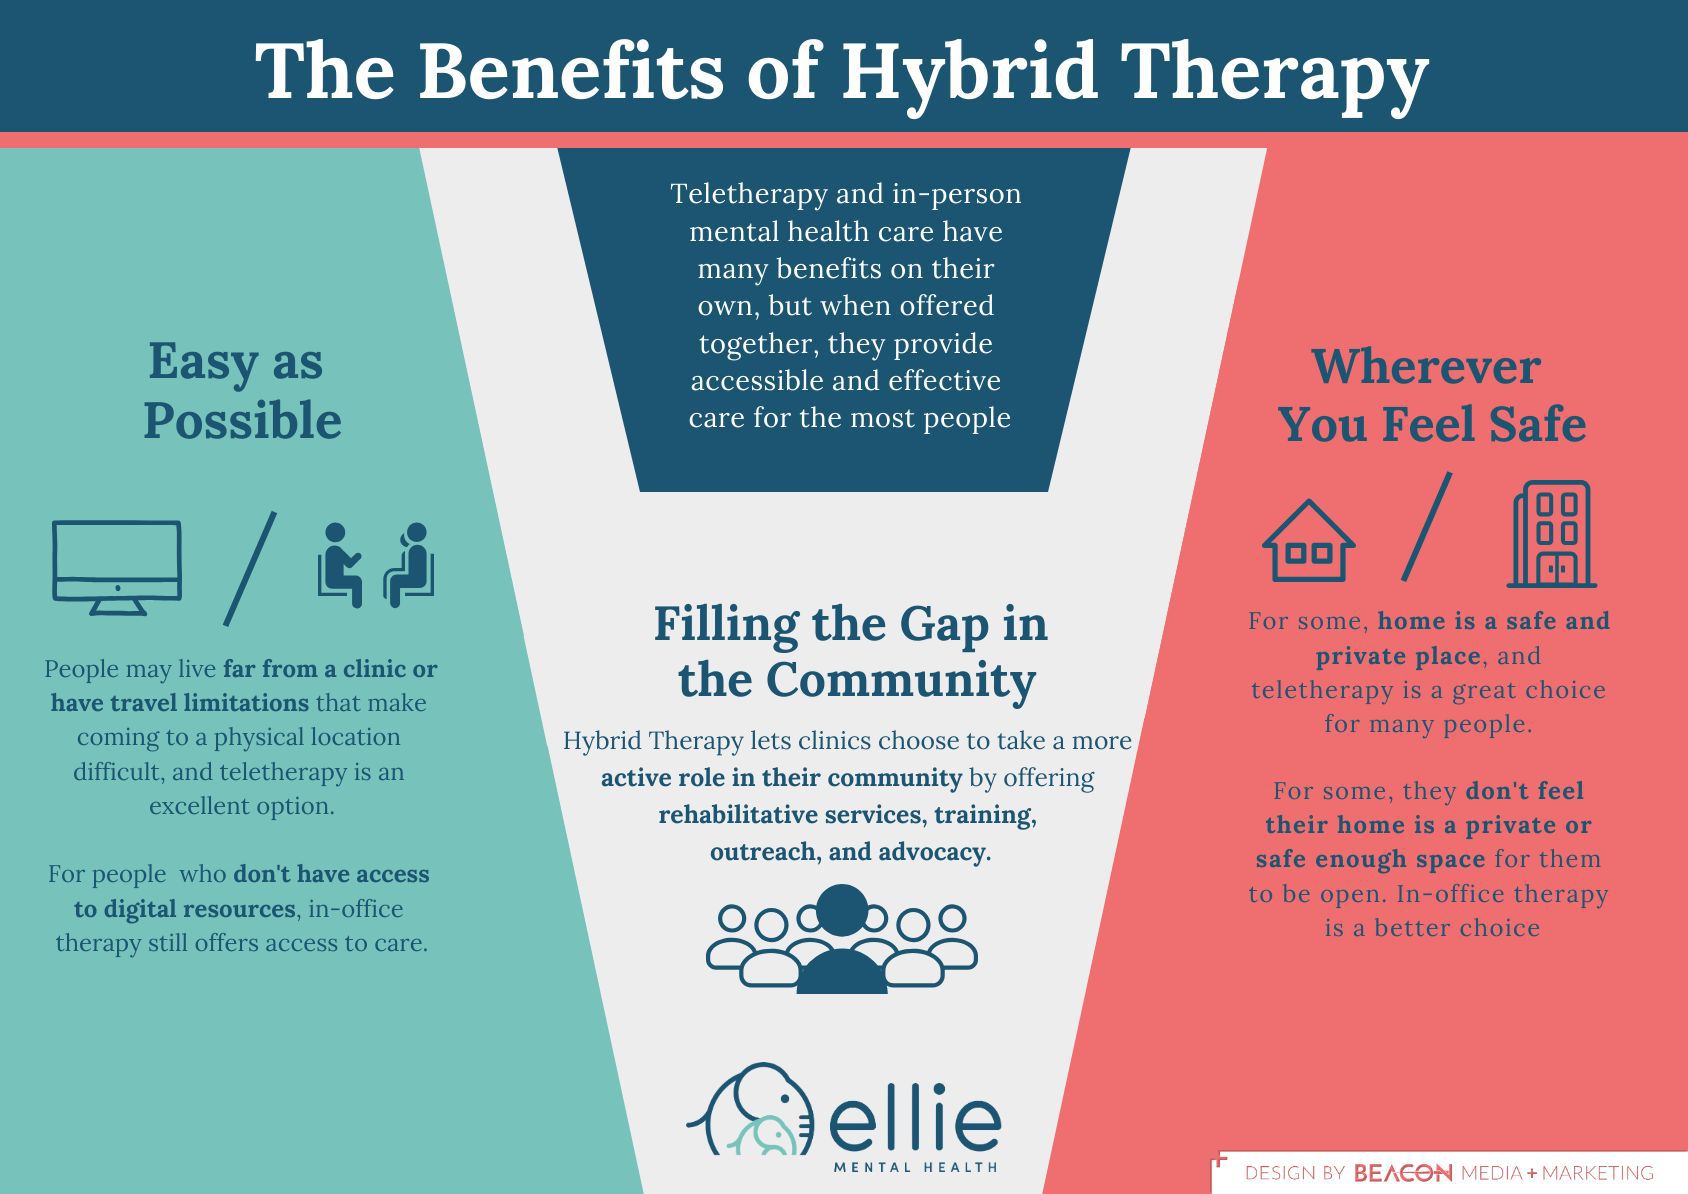 The Benefits of Hybrid Therapy infographic